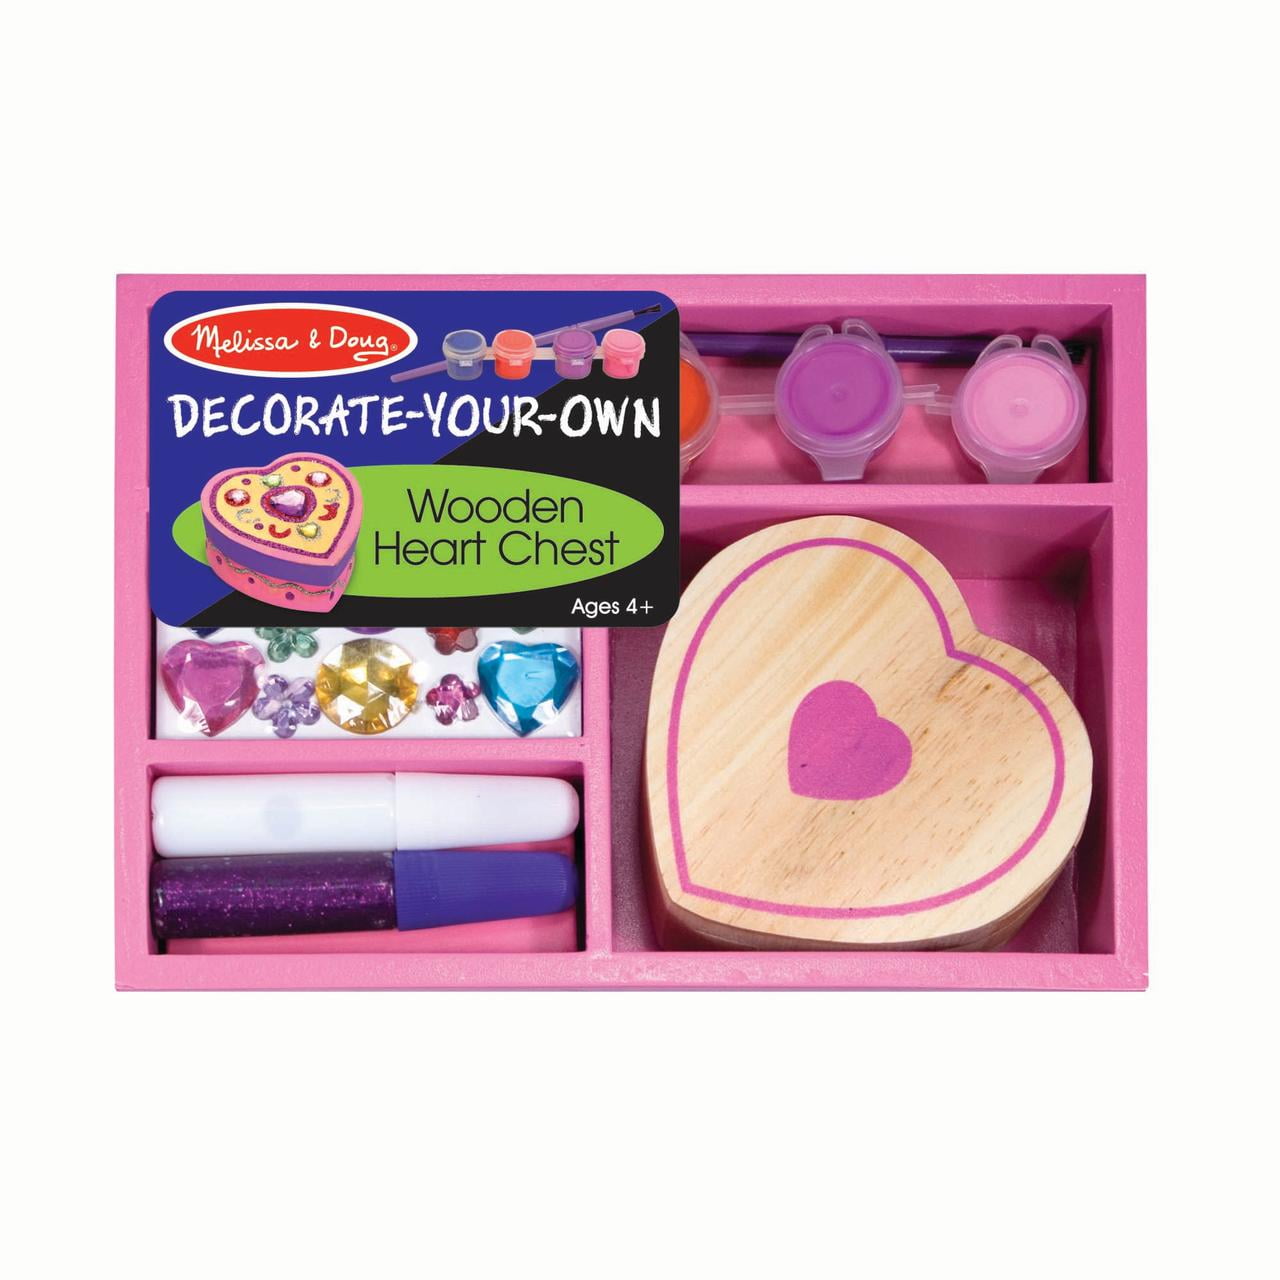 Melissa & Doug Decorate-Your-Own Double-Drawer Chest Craft Kit: 72 Foil Letter Stickers and More 2 Glitter Glues 26 Gem Stickers